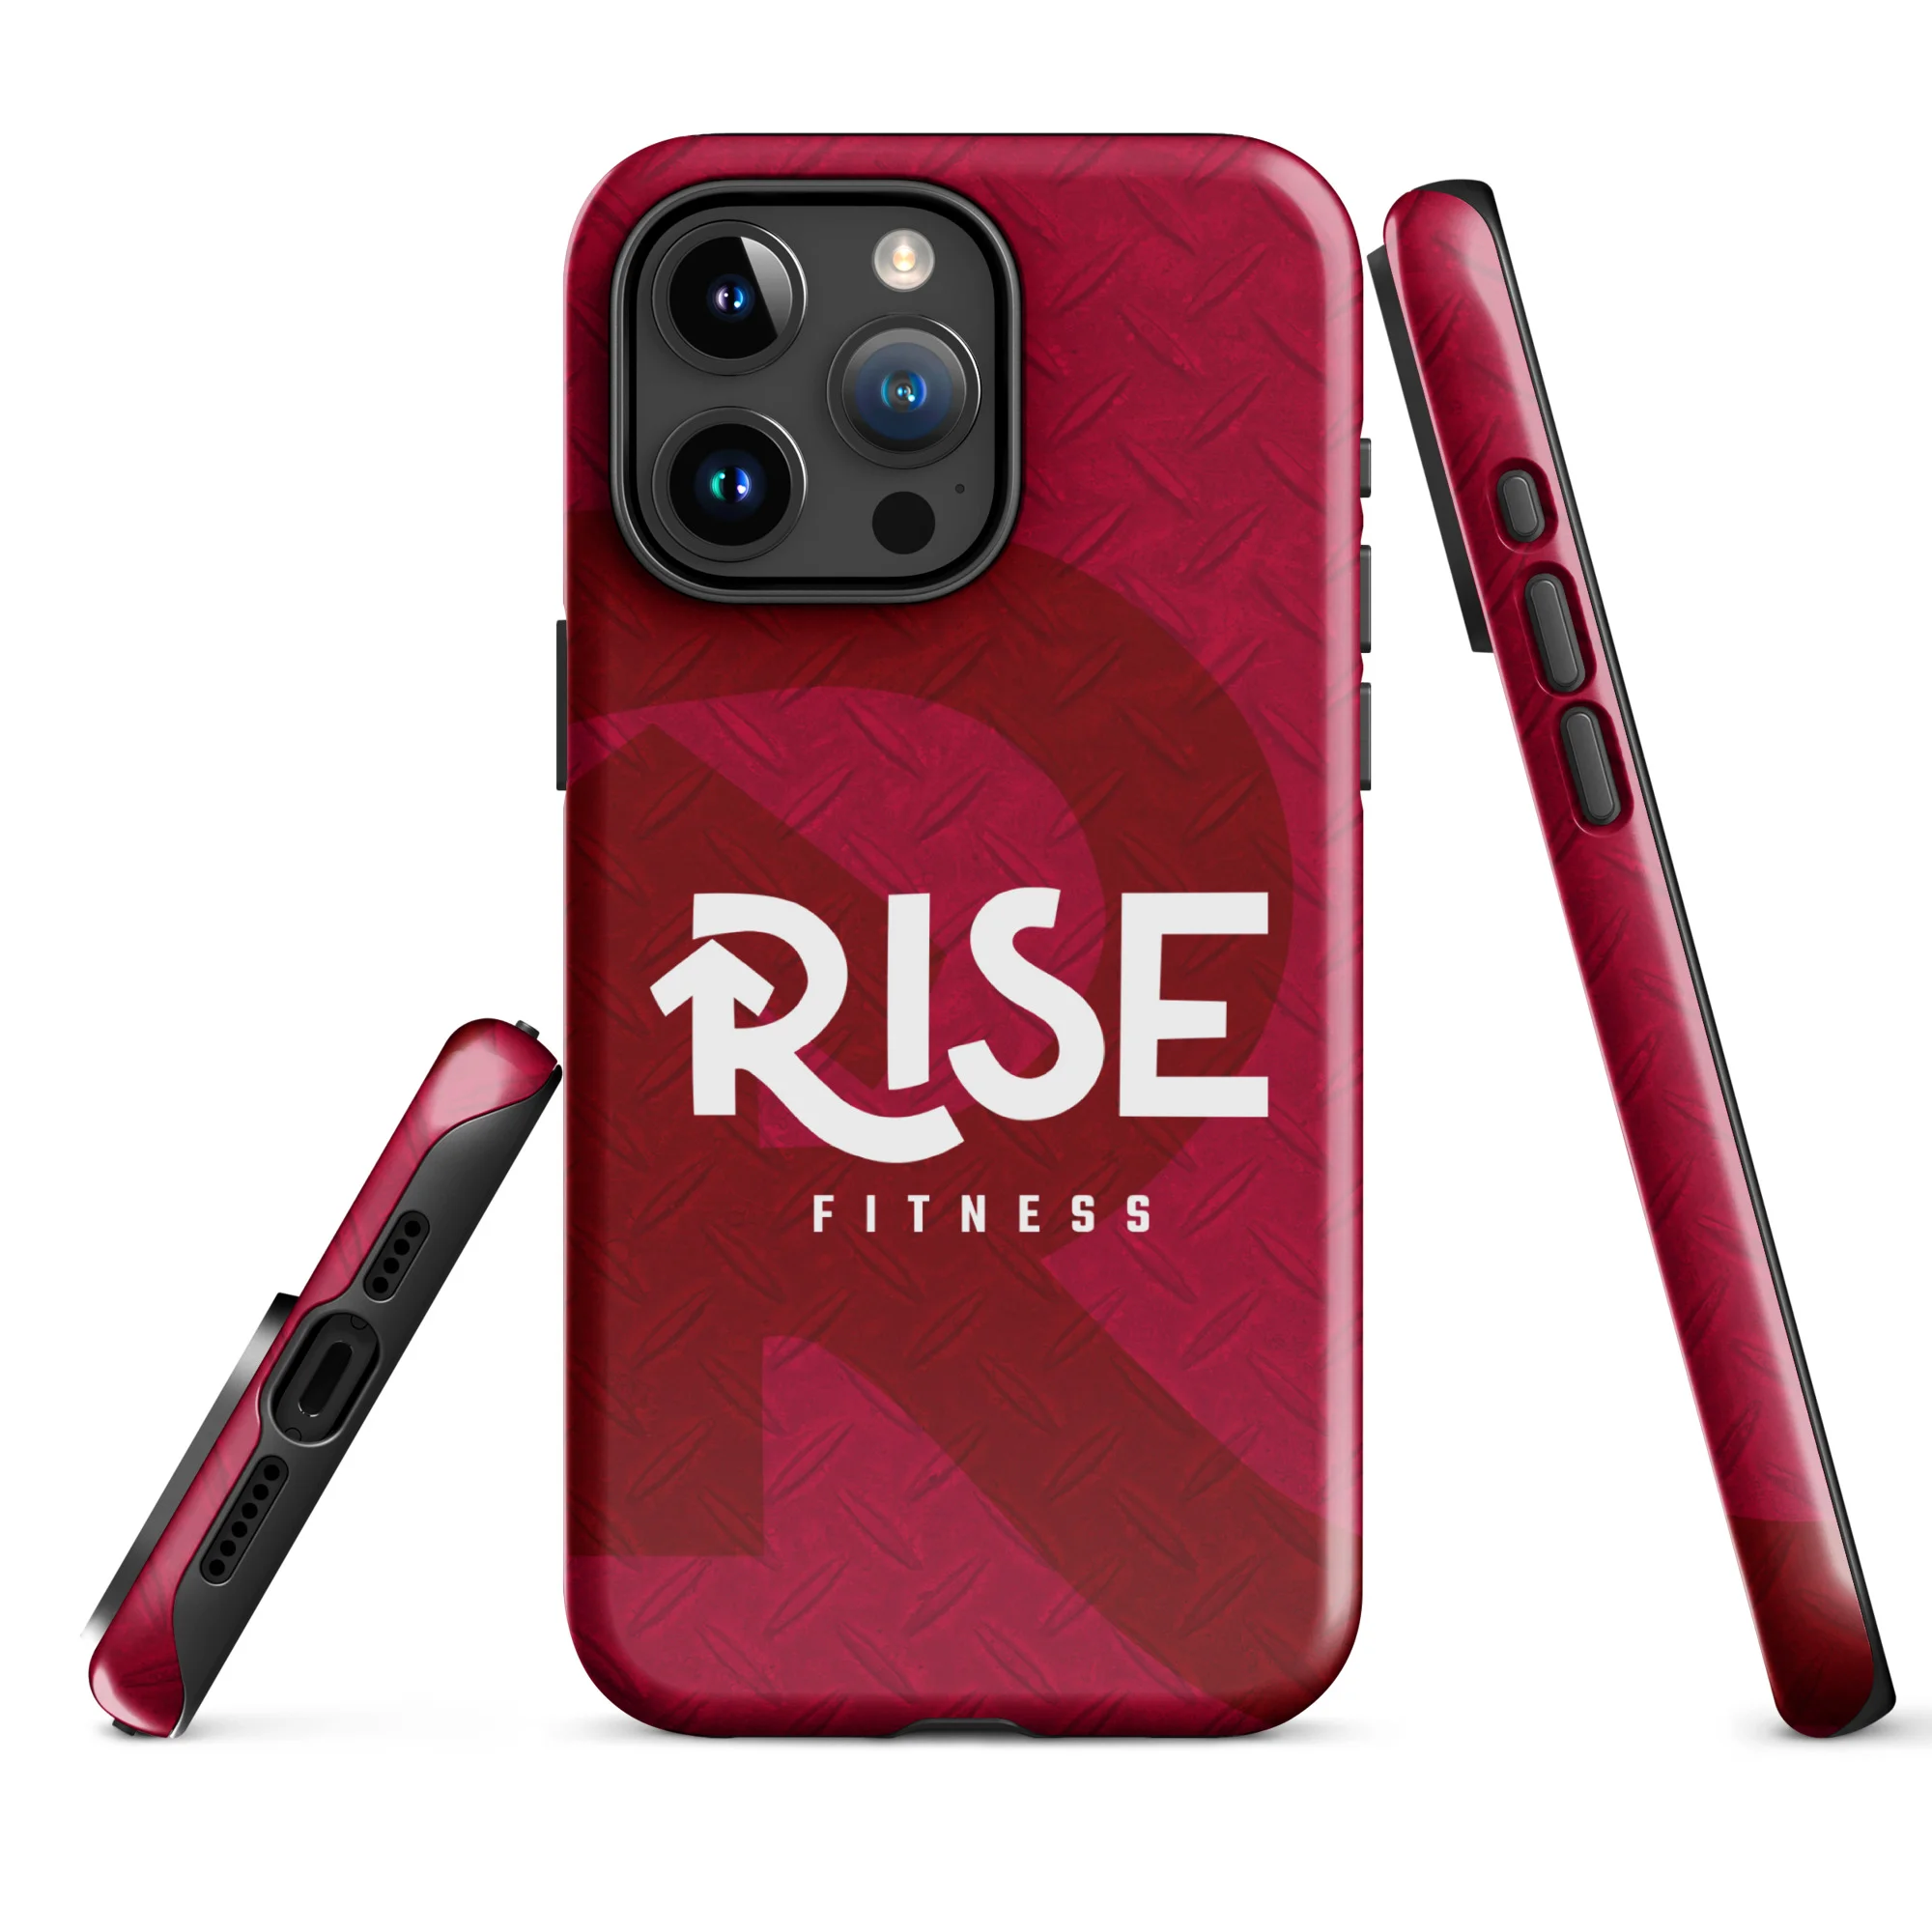 Product image for Rise Fitness iPhone Case (Cardinal Red)